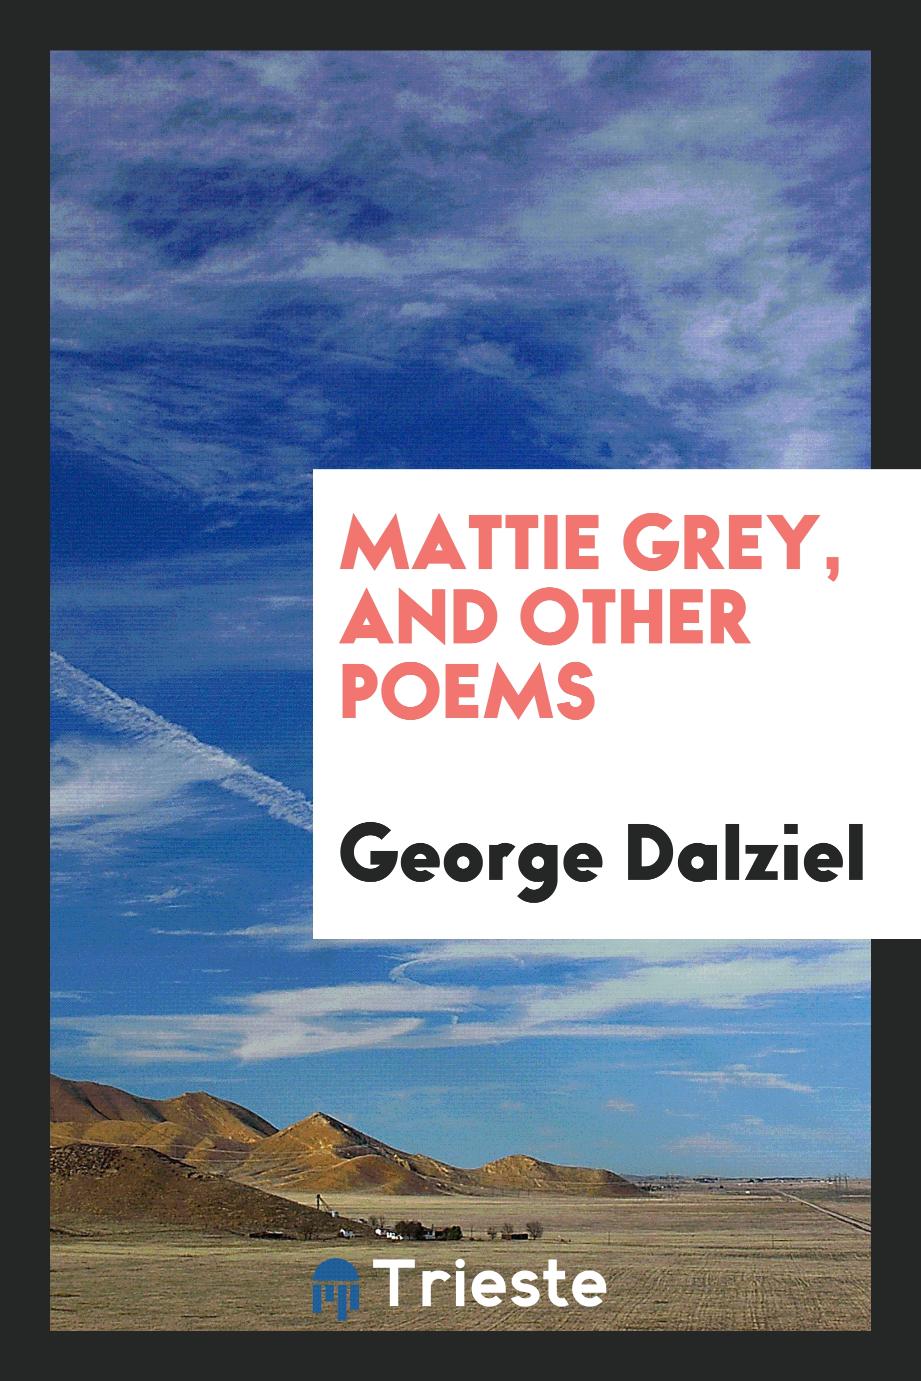 Mattie Grey, and other poems